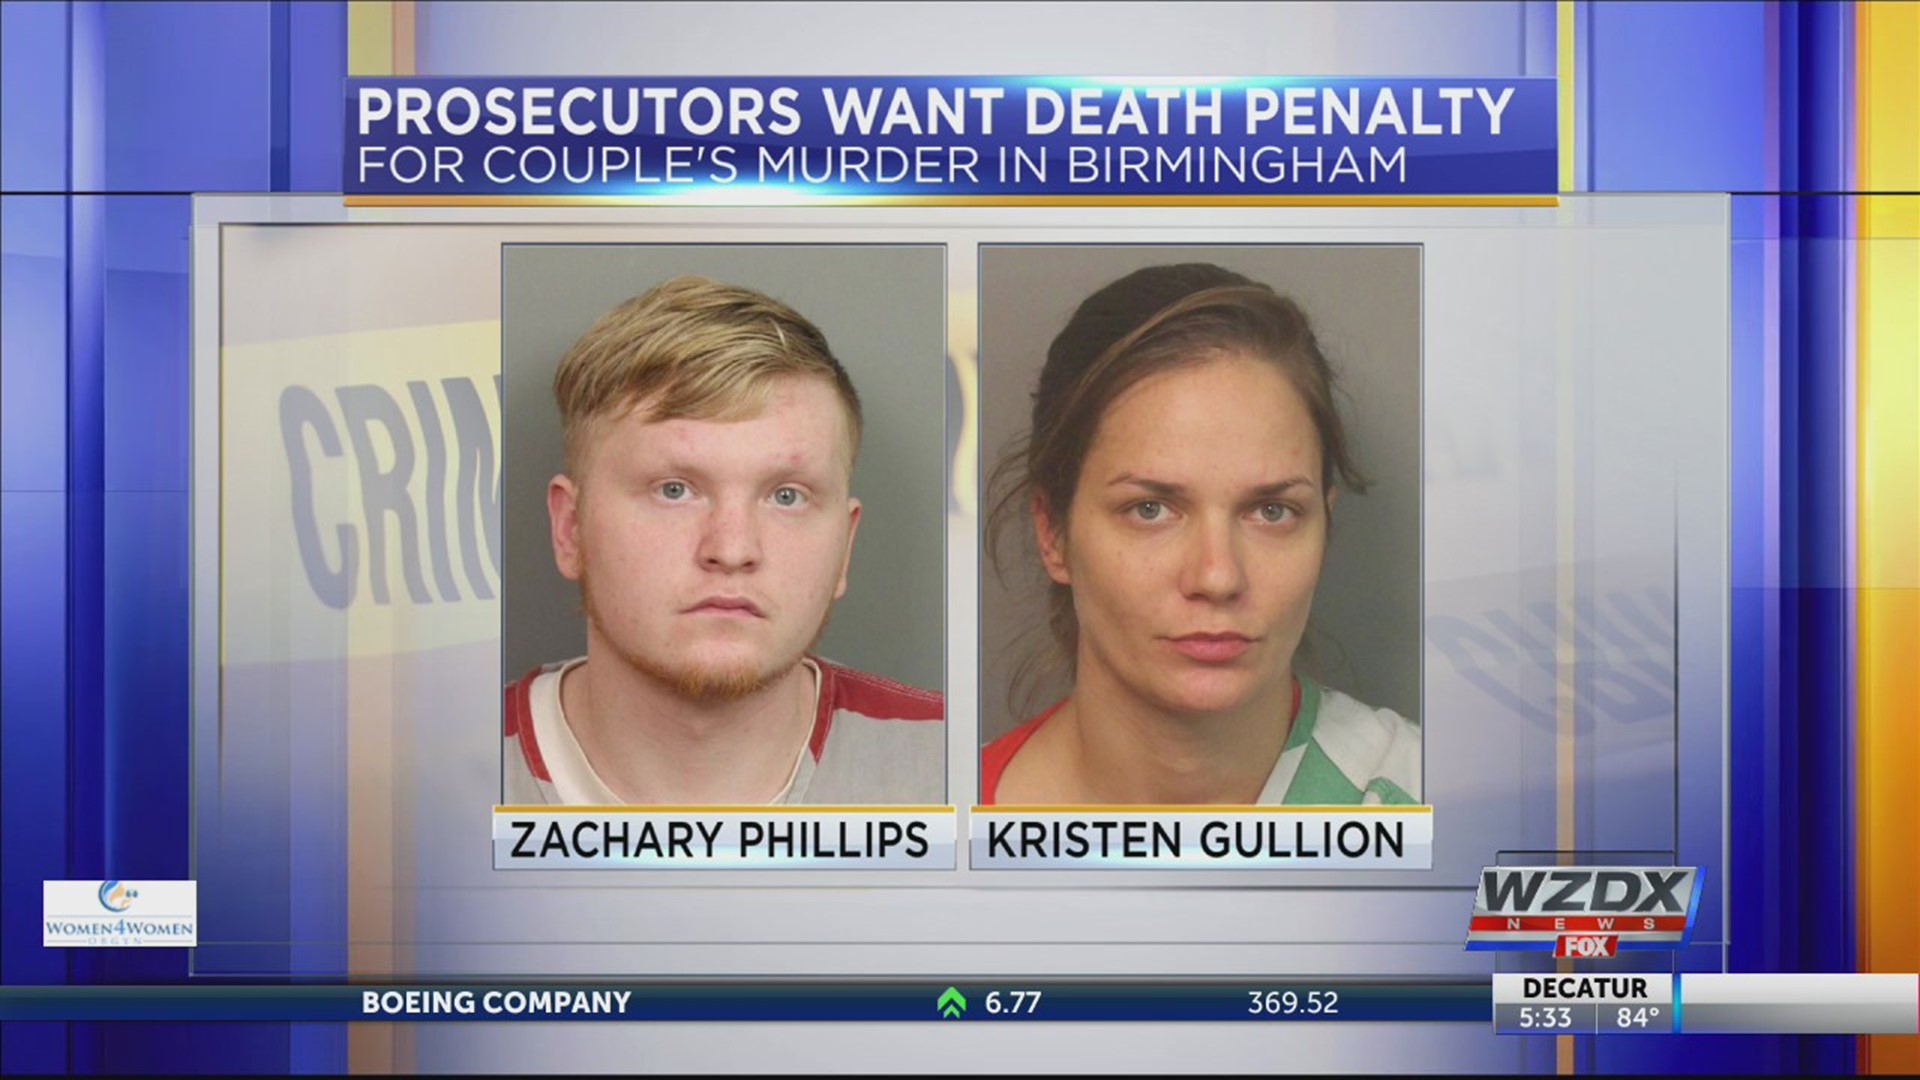 Prosecutors are seeking the death penalty against two people charged with the murder of a Birmingham couple.